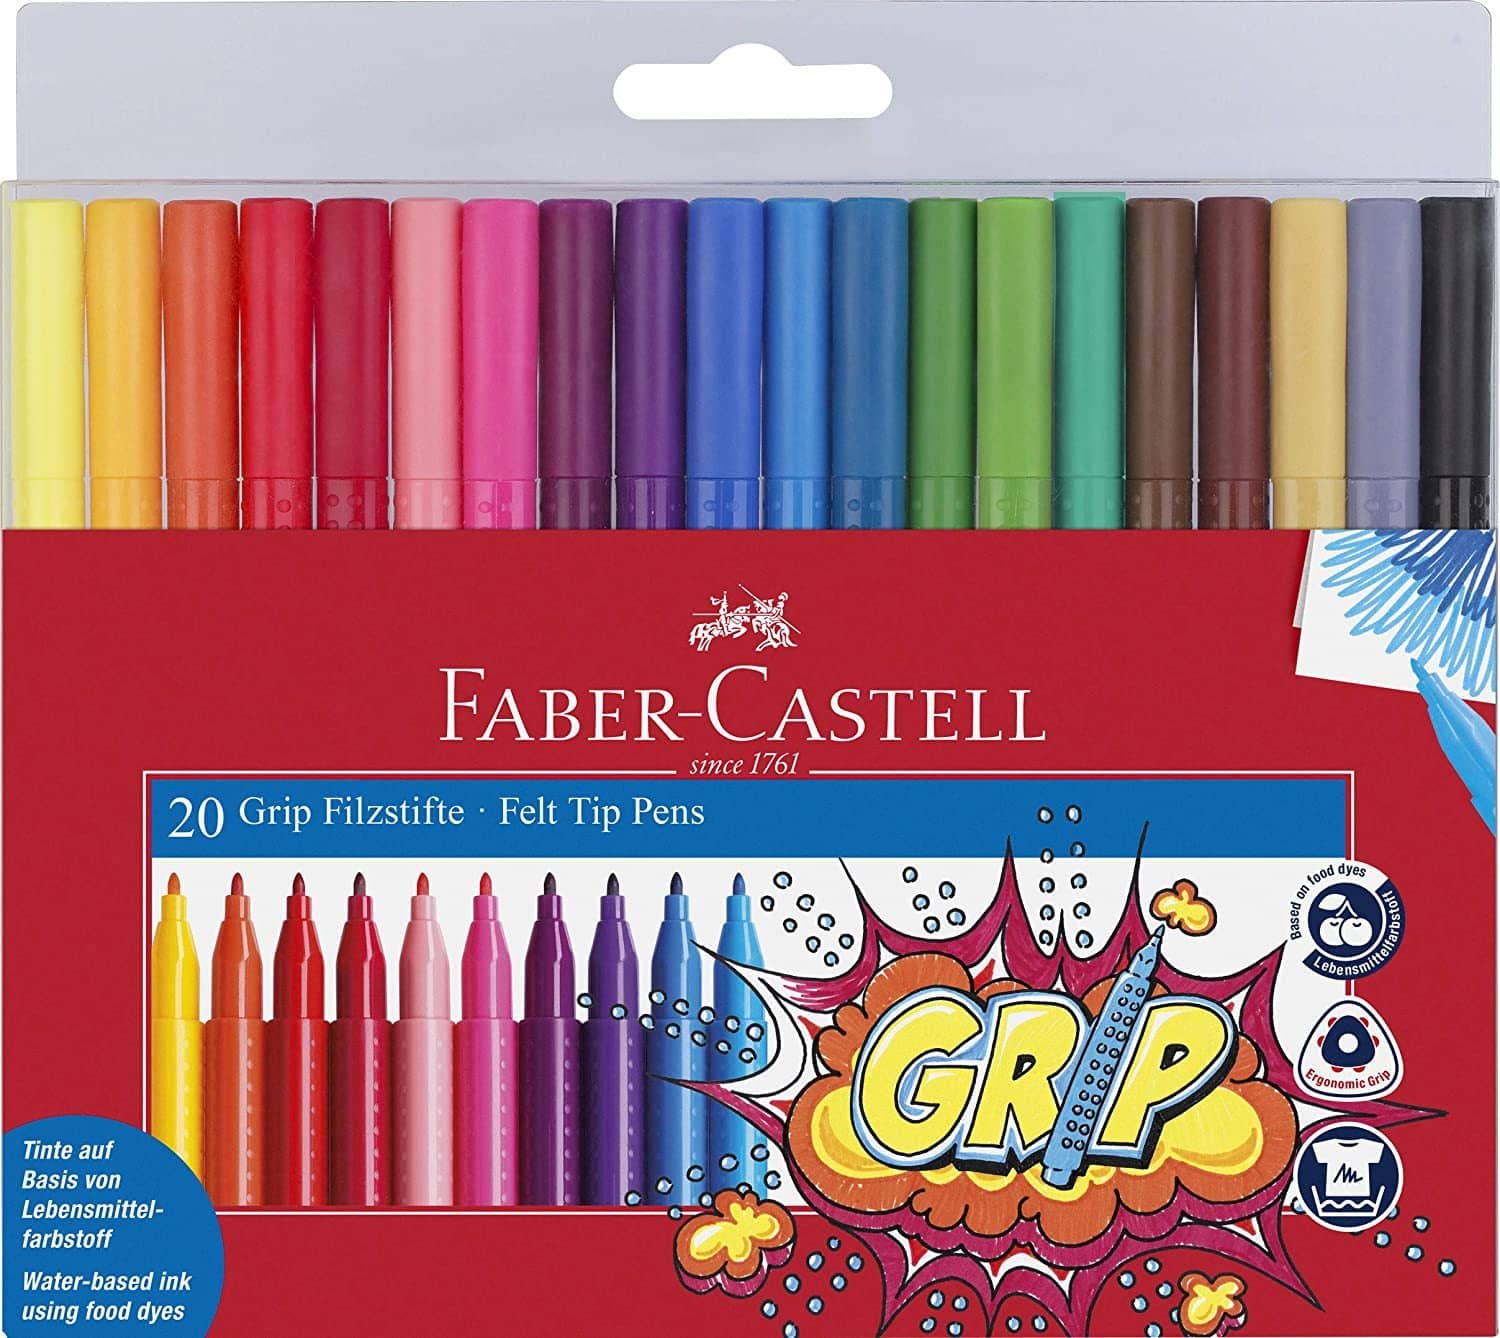 Faber-Castell Duo-Tip Washable Marker Set, Assorted Colors, Set of 24